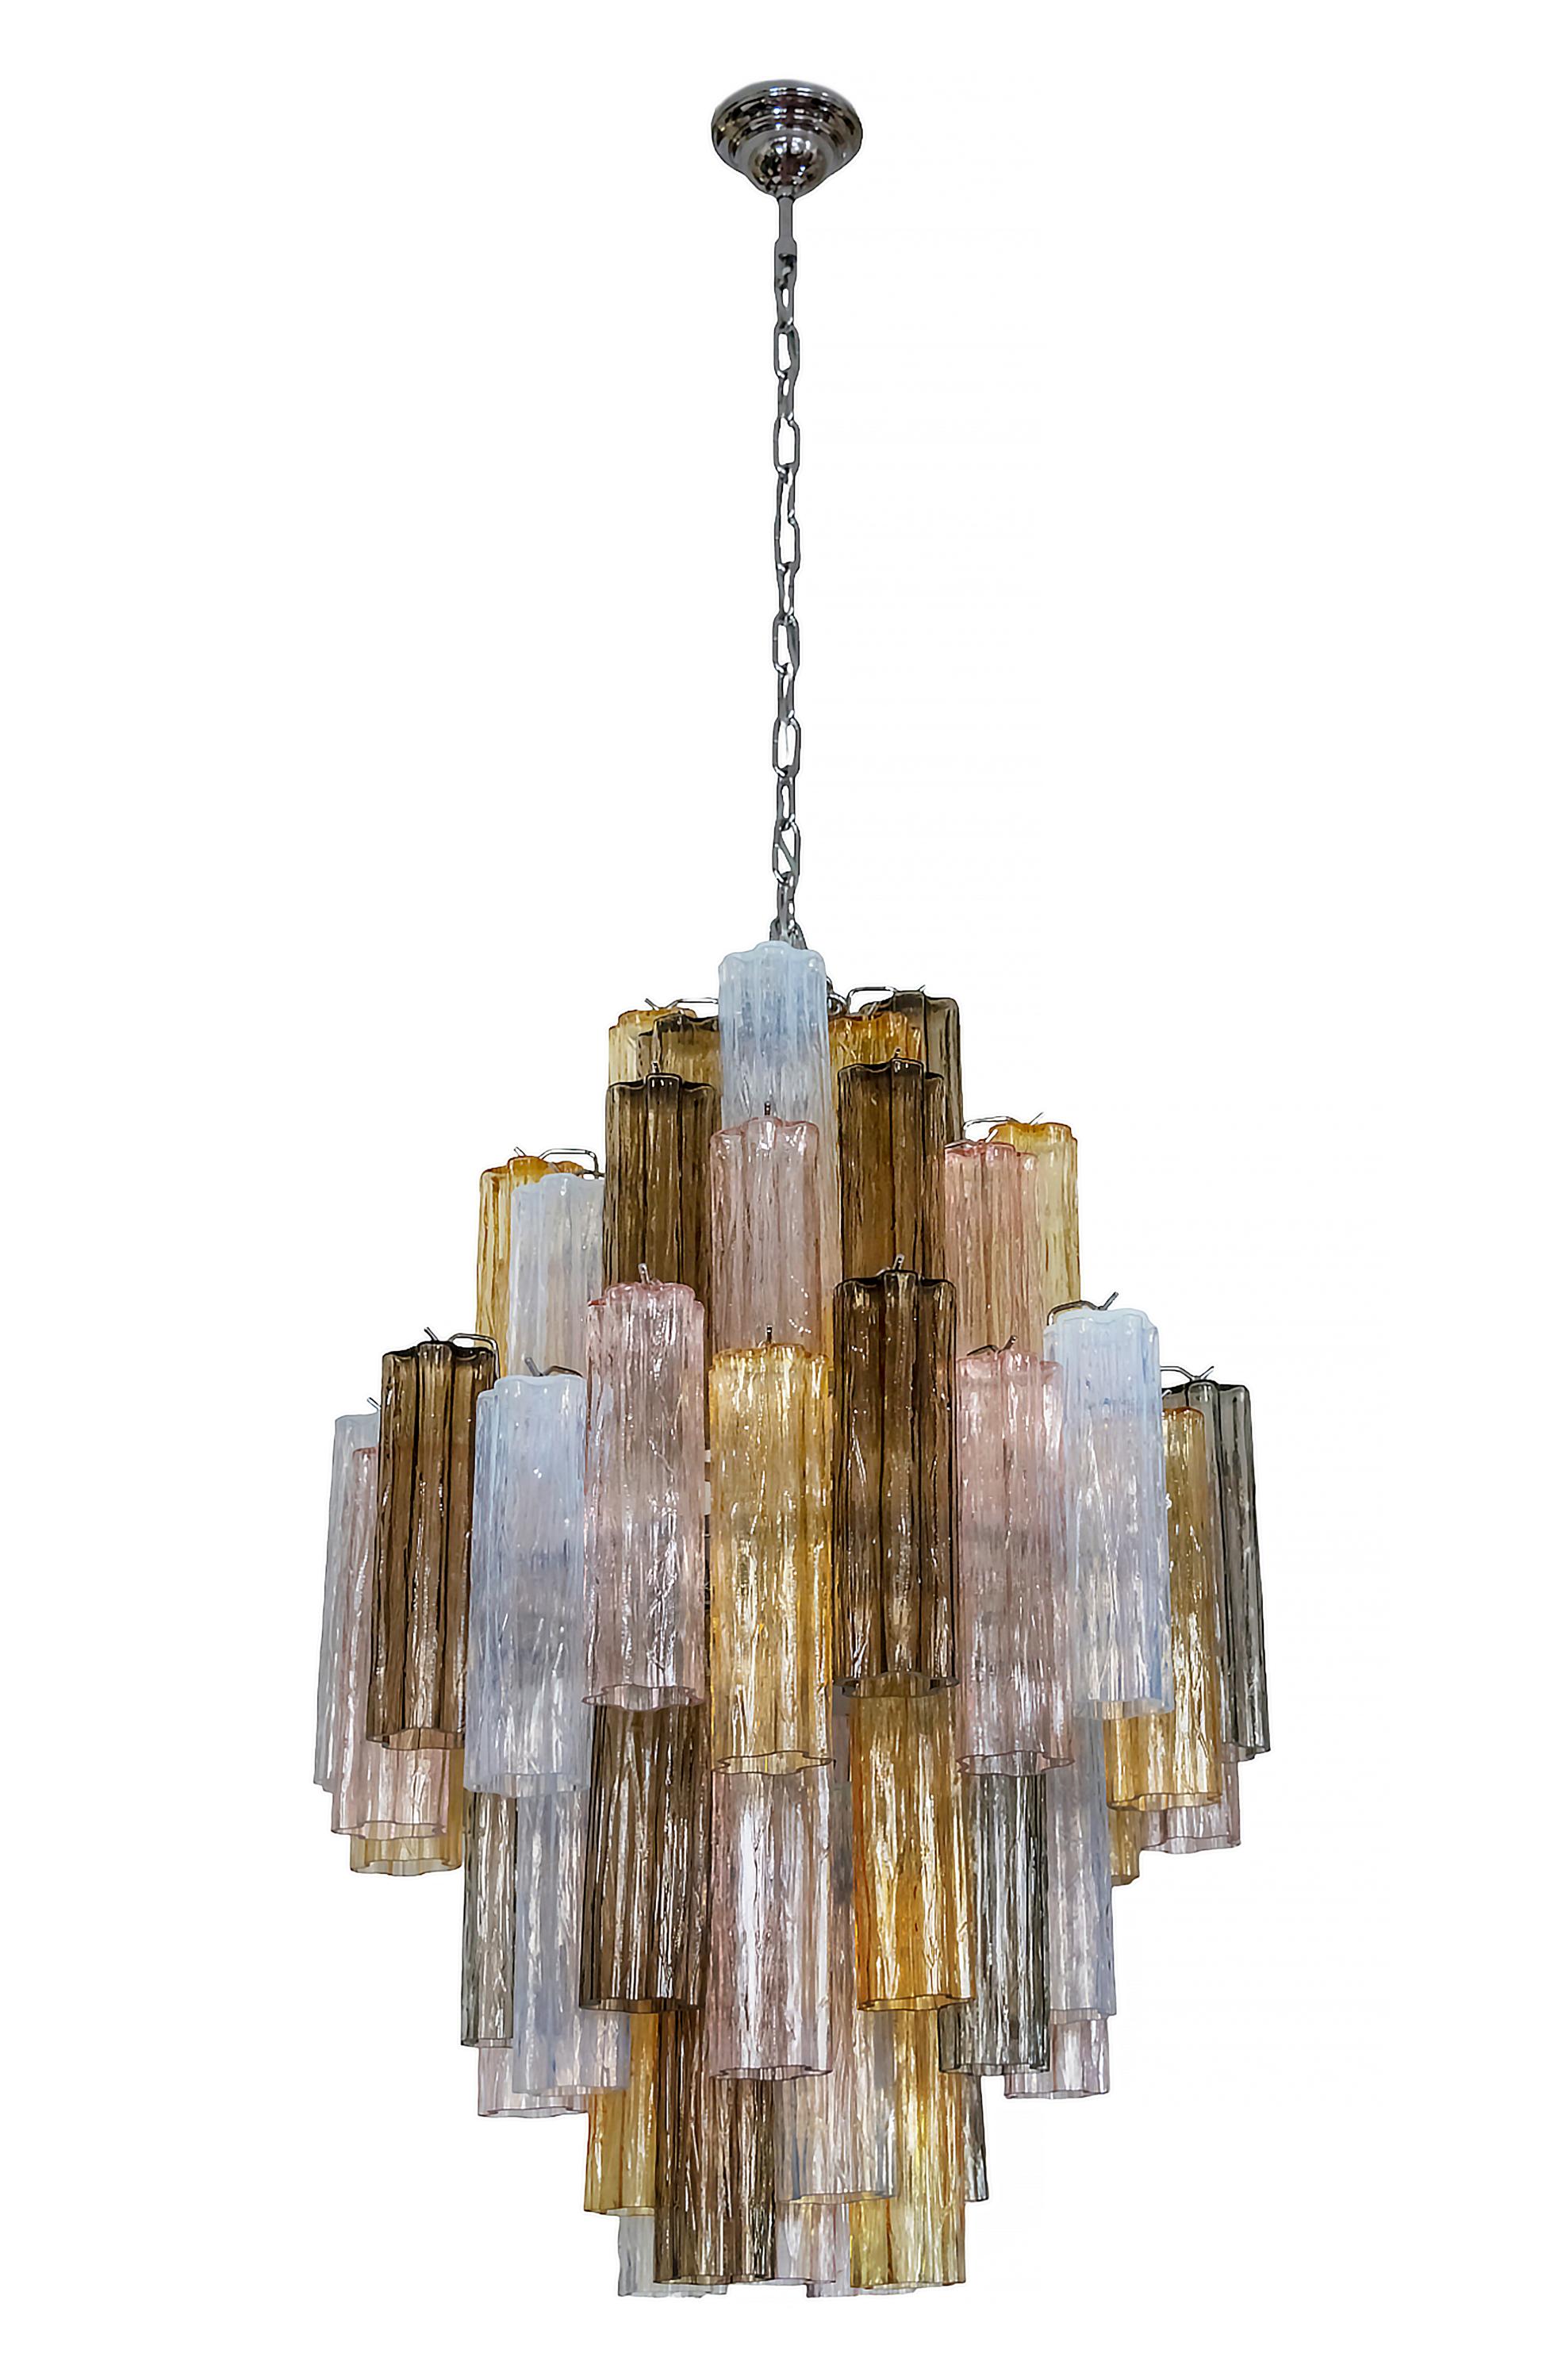 Italian handmade Murano glass chandelier.
The design of this chandelier is made in chrome base with 5 colors Tubi Tronchi glass elements. 
Its is in a very good original vintage condition.
Without chain height is 90 cm.

.